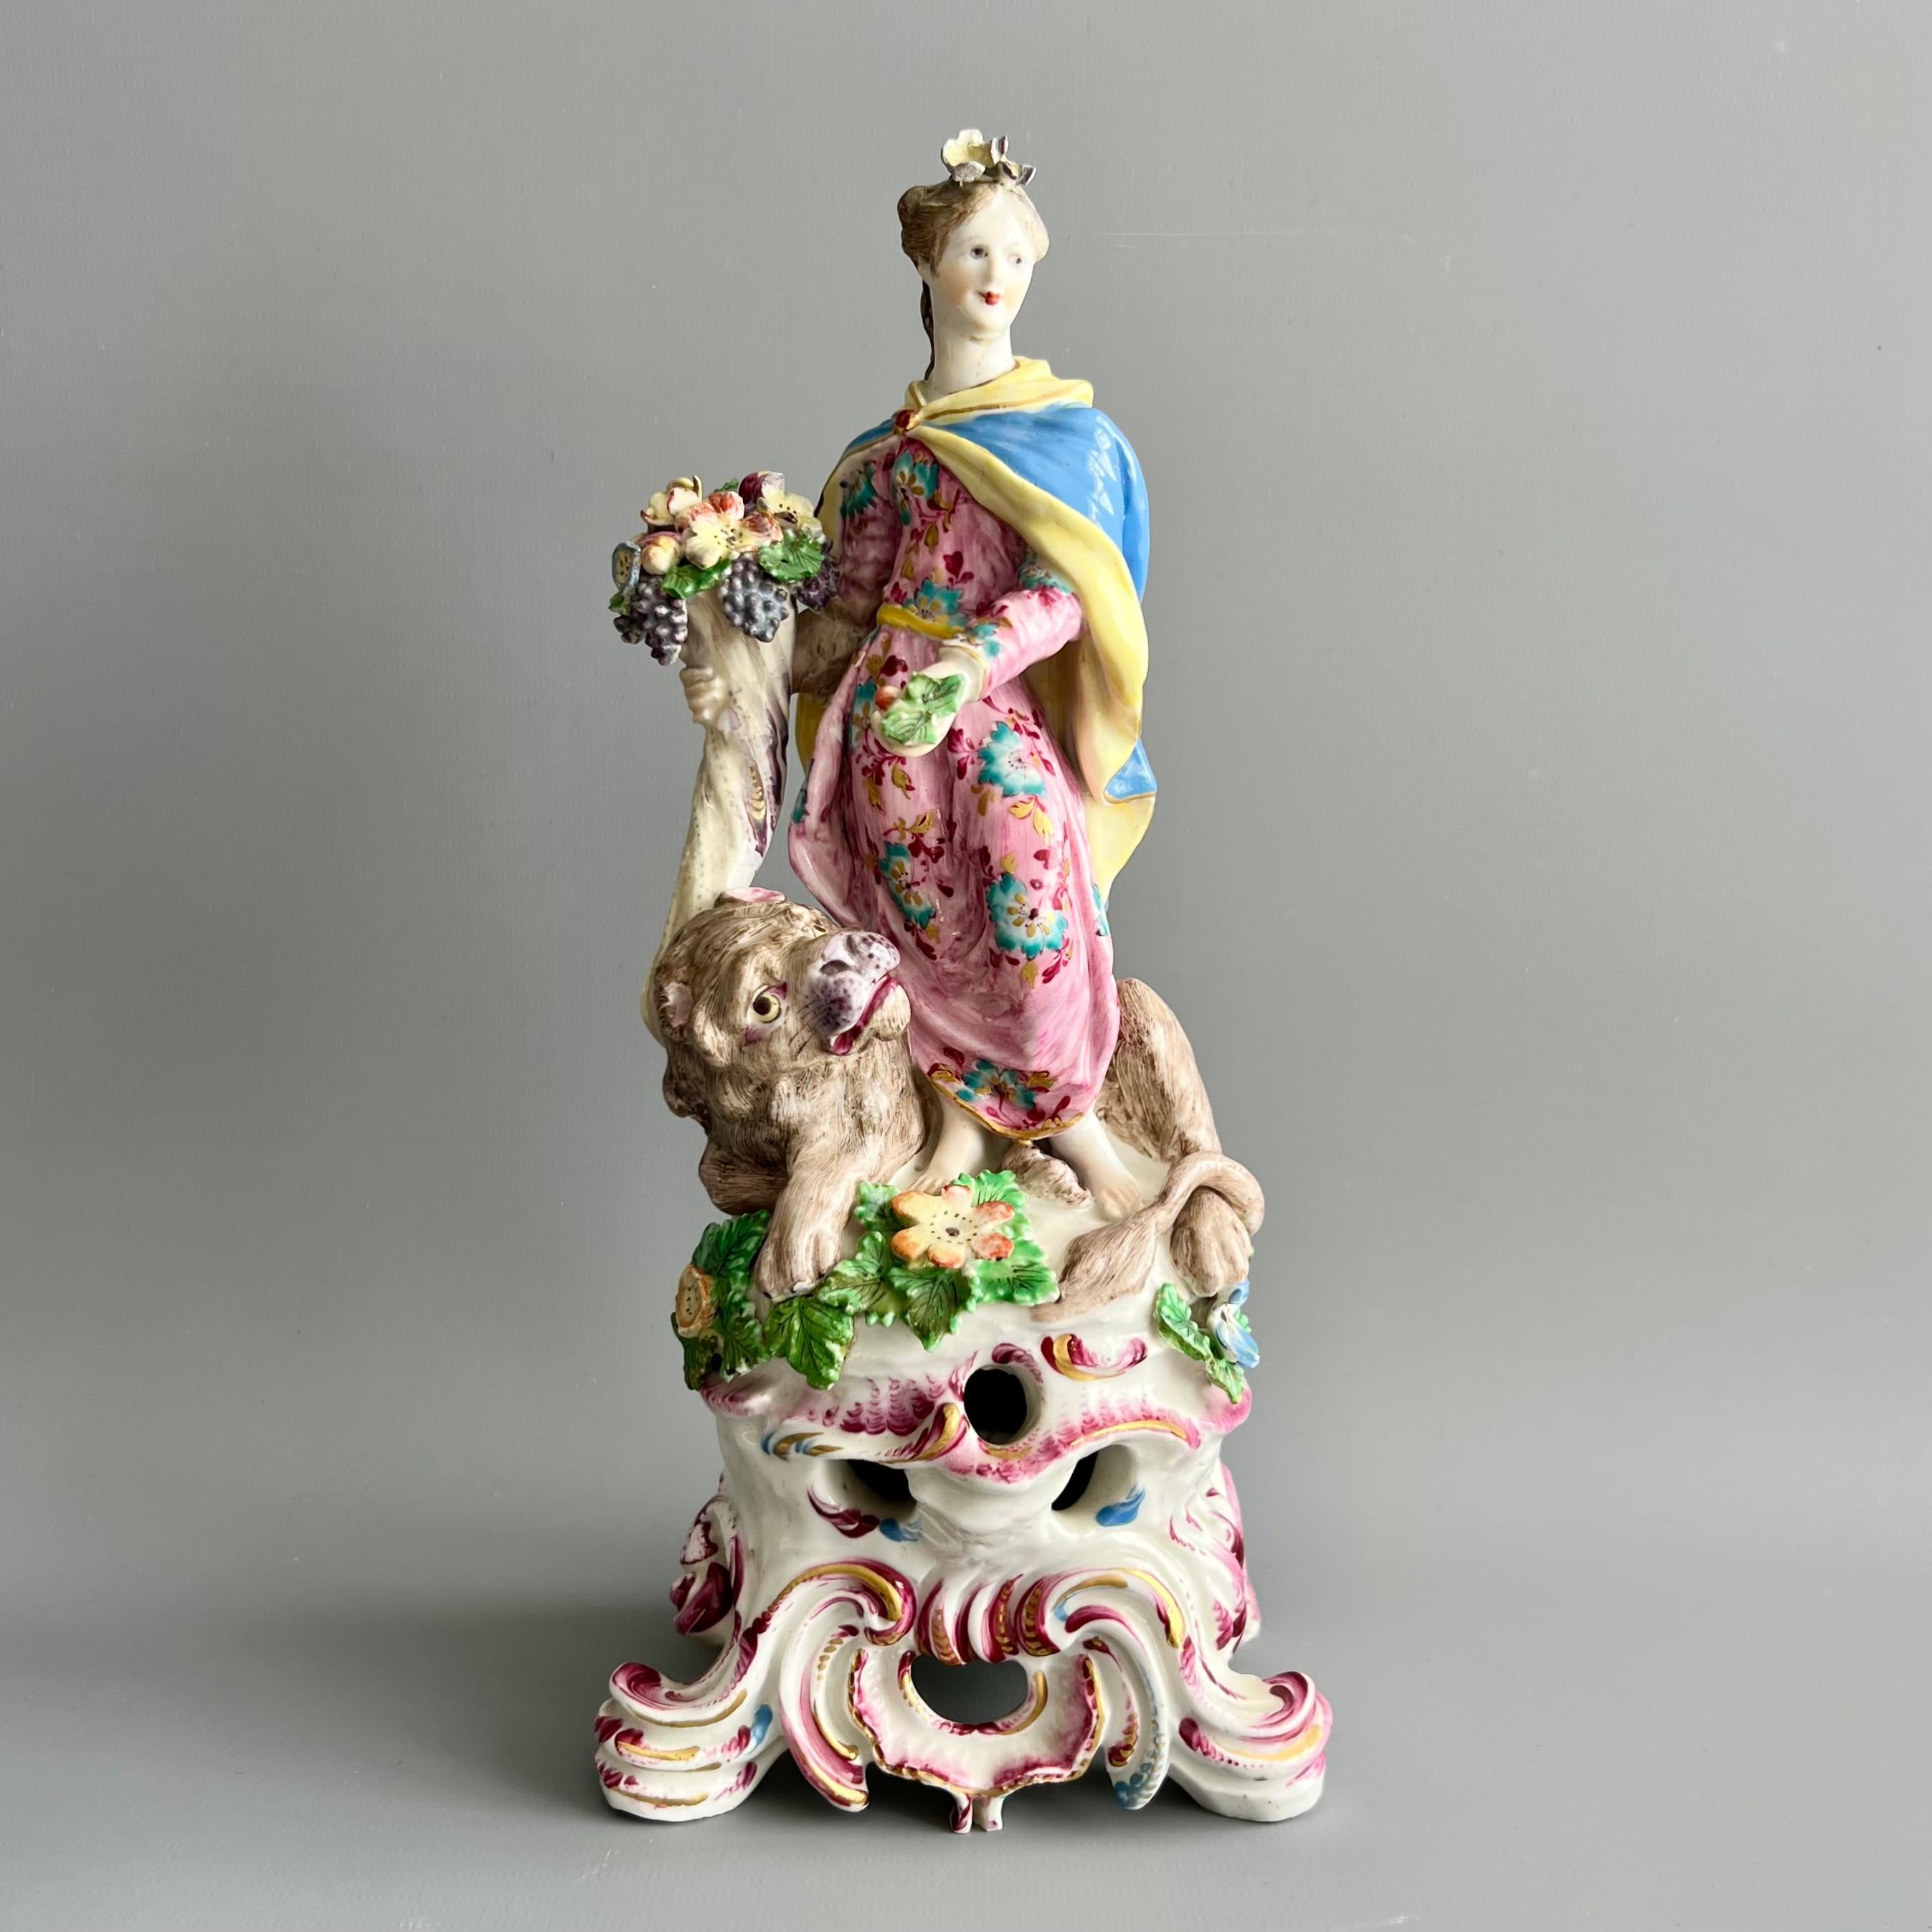 This is a very rare and impressive complete set of large figures called The Four Elements, made by the Bow Porcelain factory in about 1765. It consists of Ceres representing Earth, Vulcan representing Fire, Neptune representing Water andJuno